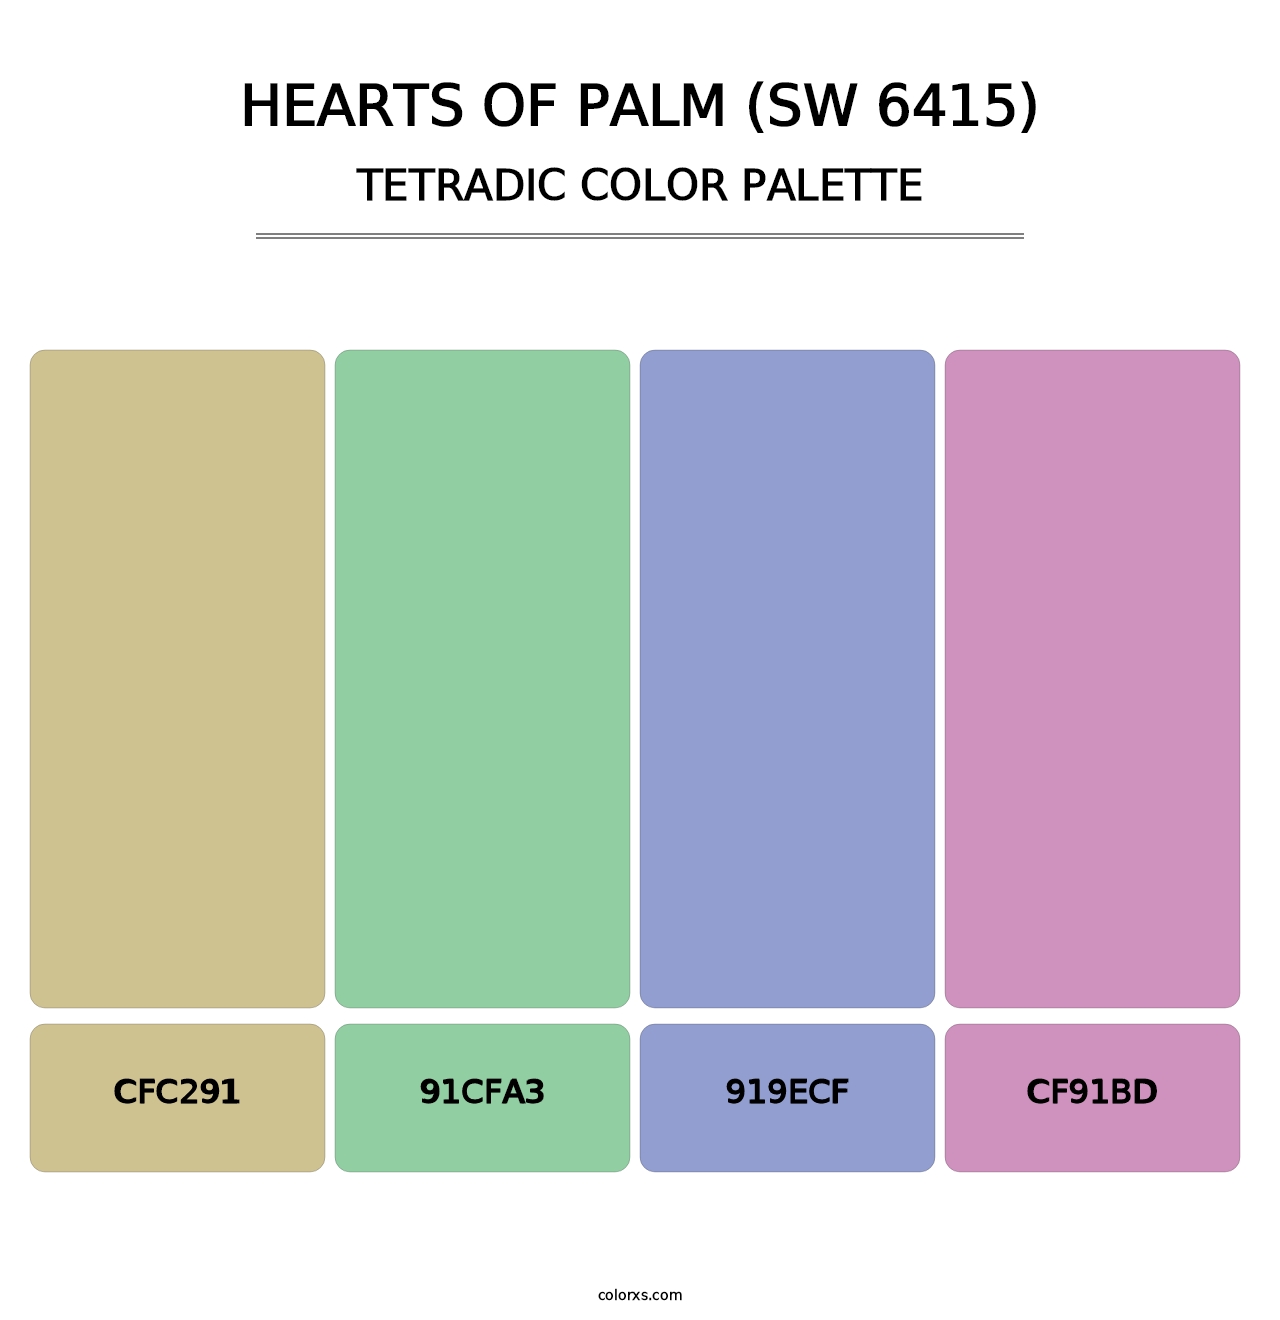 Hearts of Palm (SW 6415) - Tetradic Color Palette